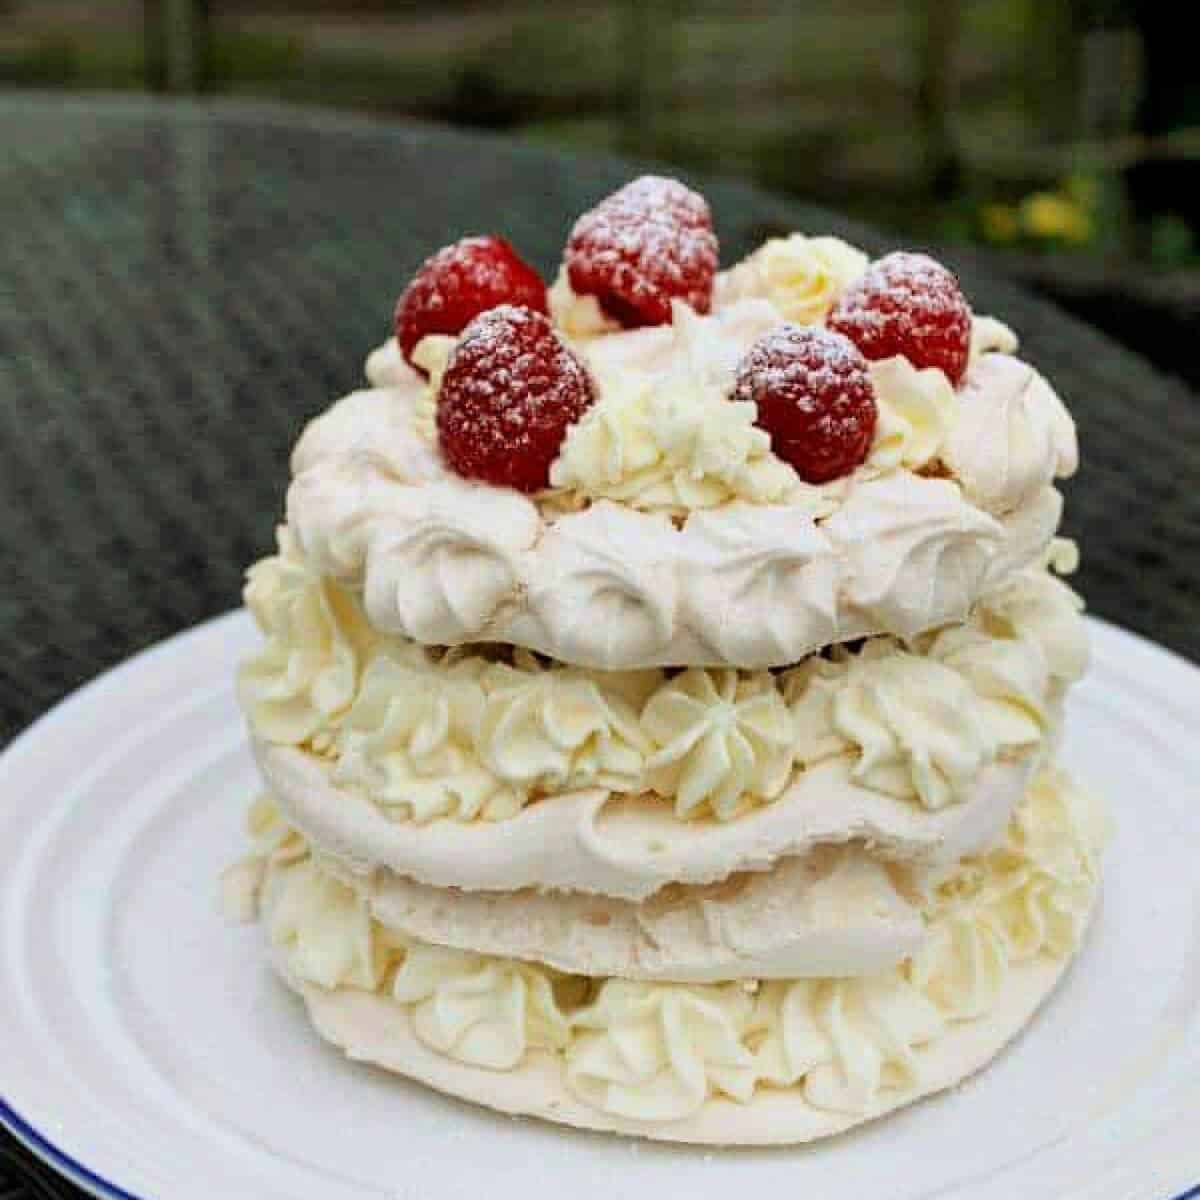 Birthday Cake Decorated with Meringues - YouTube